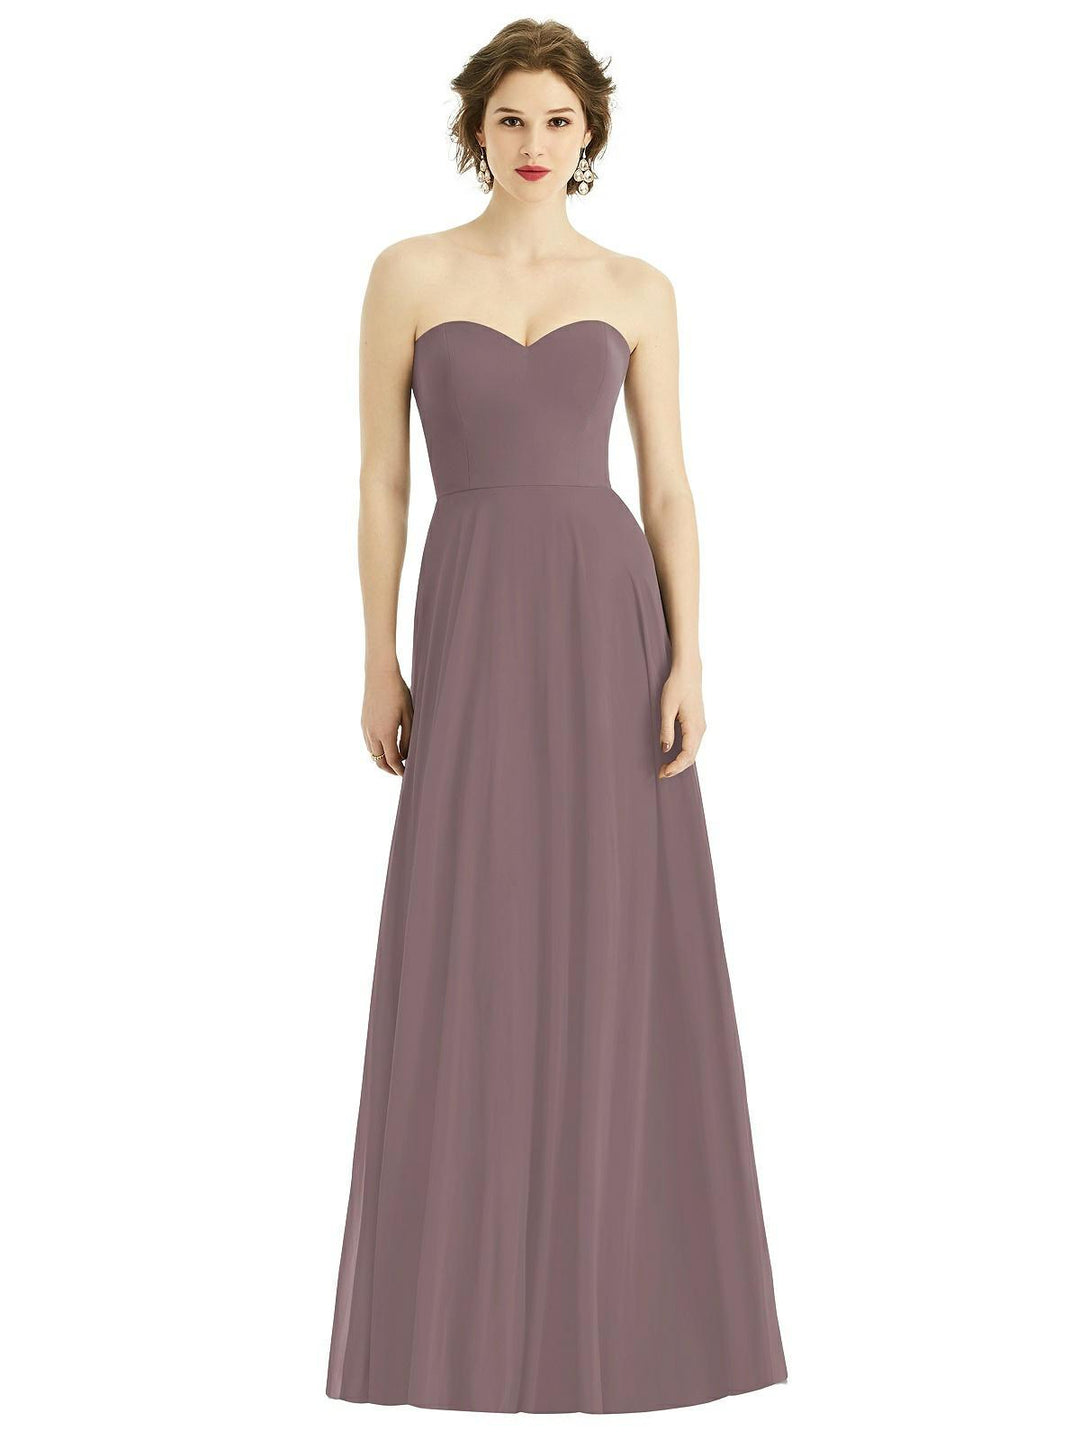 Strapless Sweetheart Gown by Dessy Style 1504 Size 8